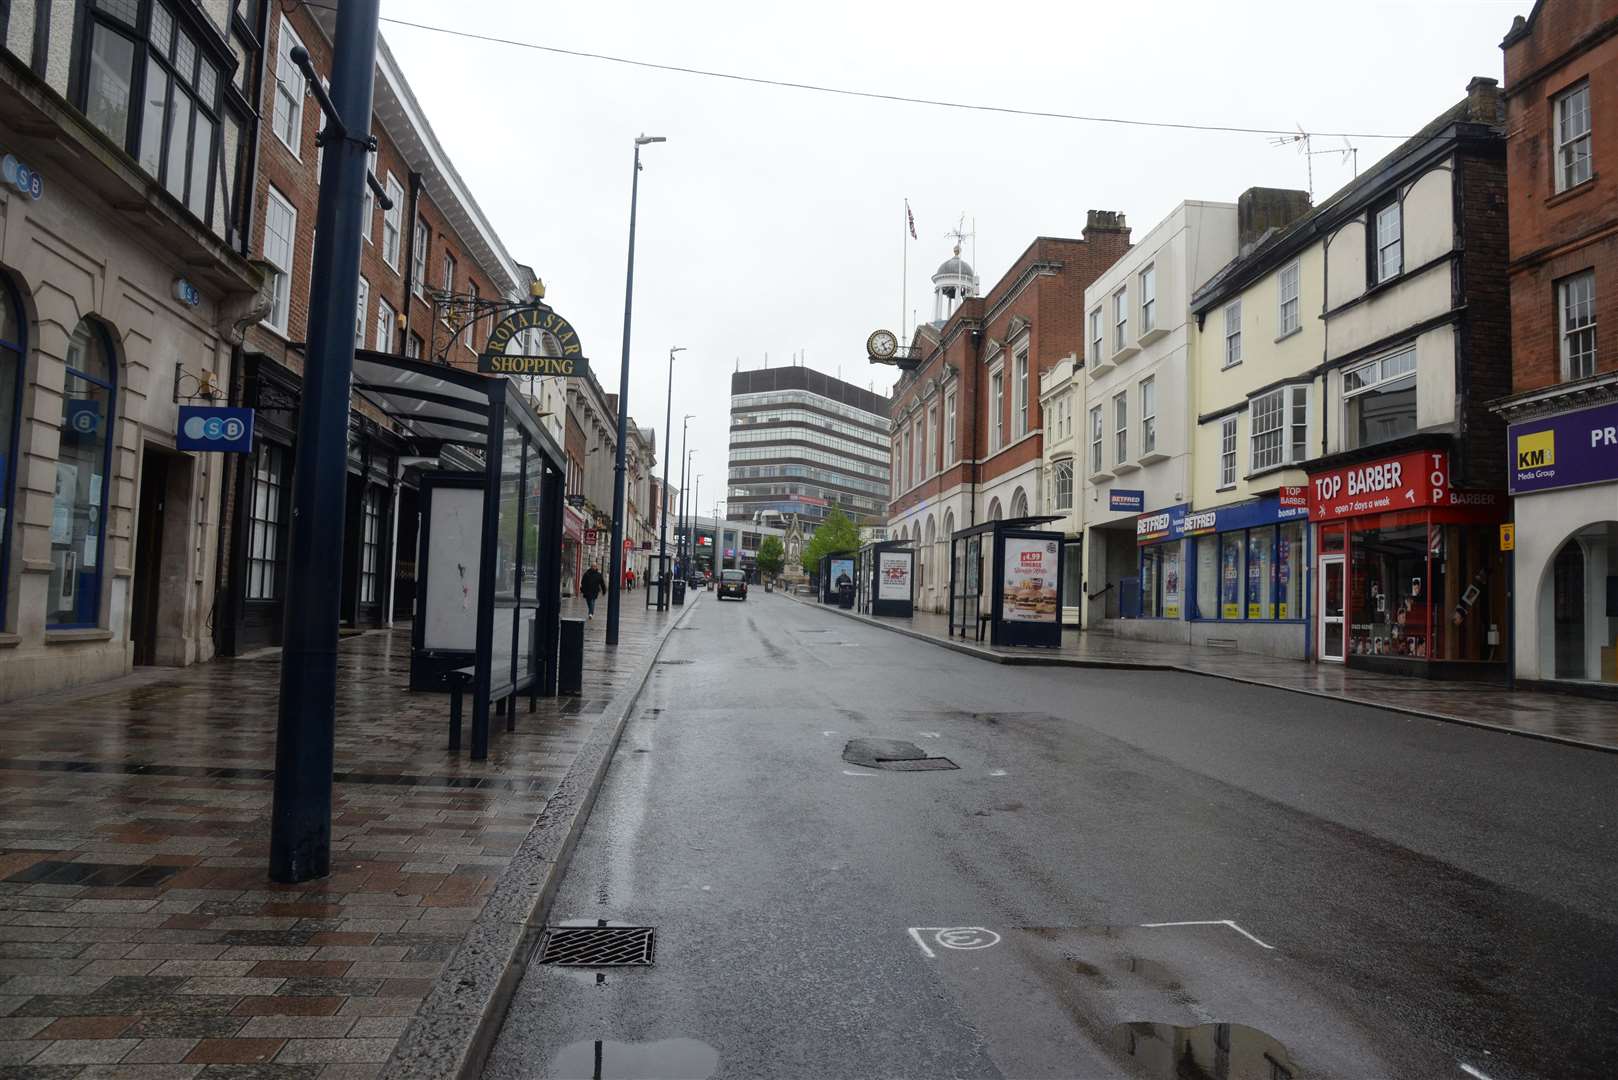 Maidstone town centre was deserted during lockdown in April